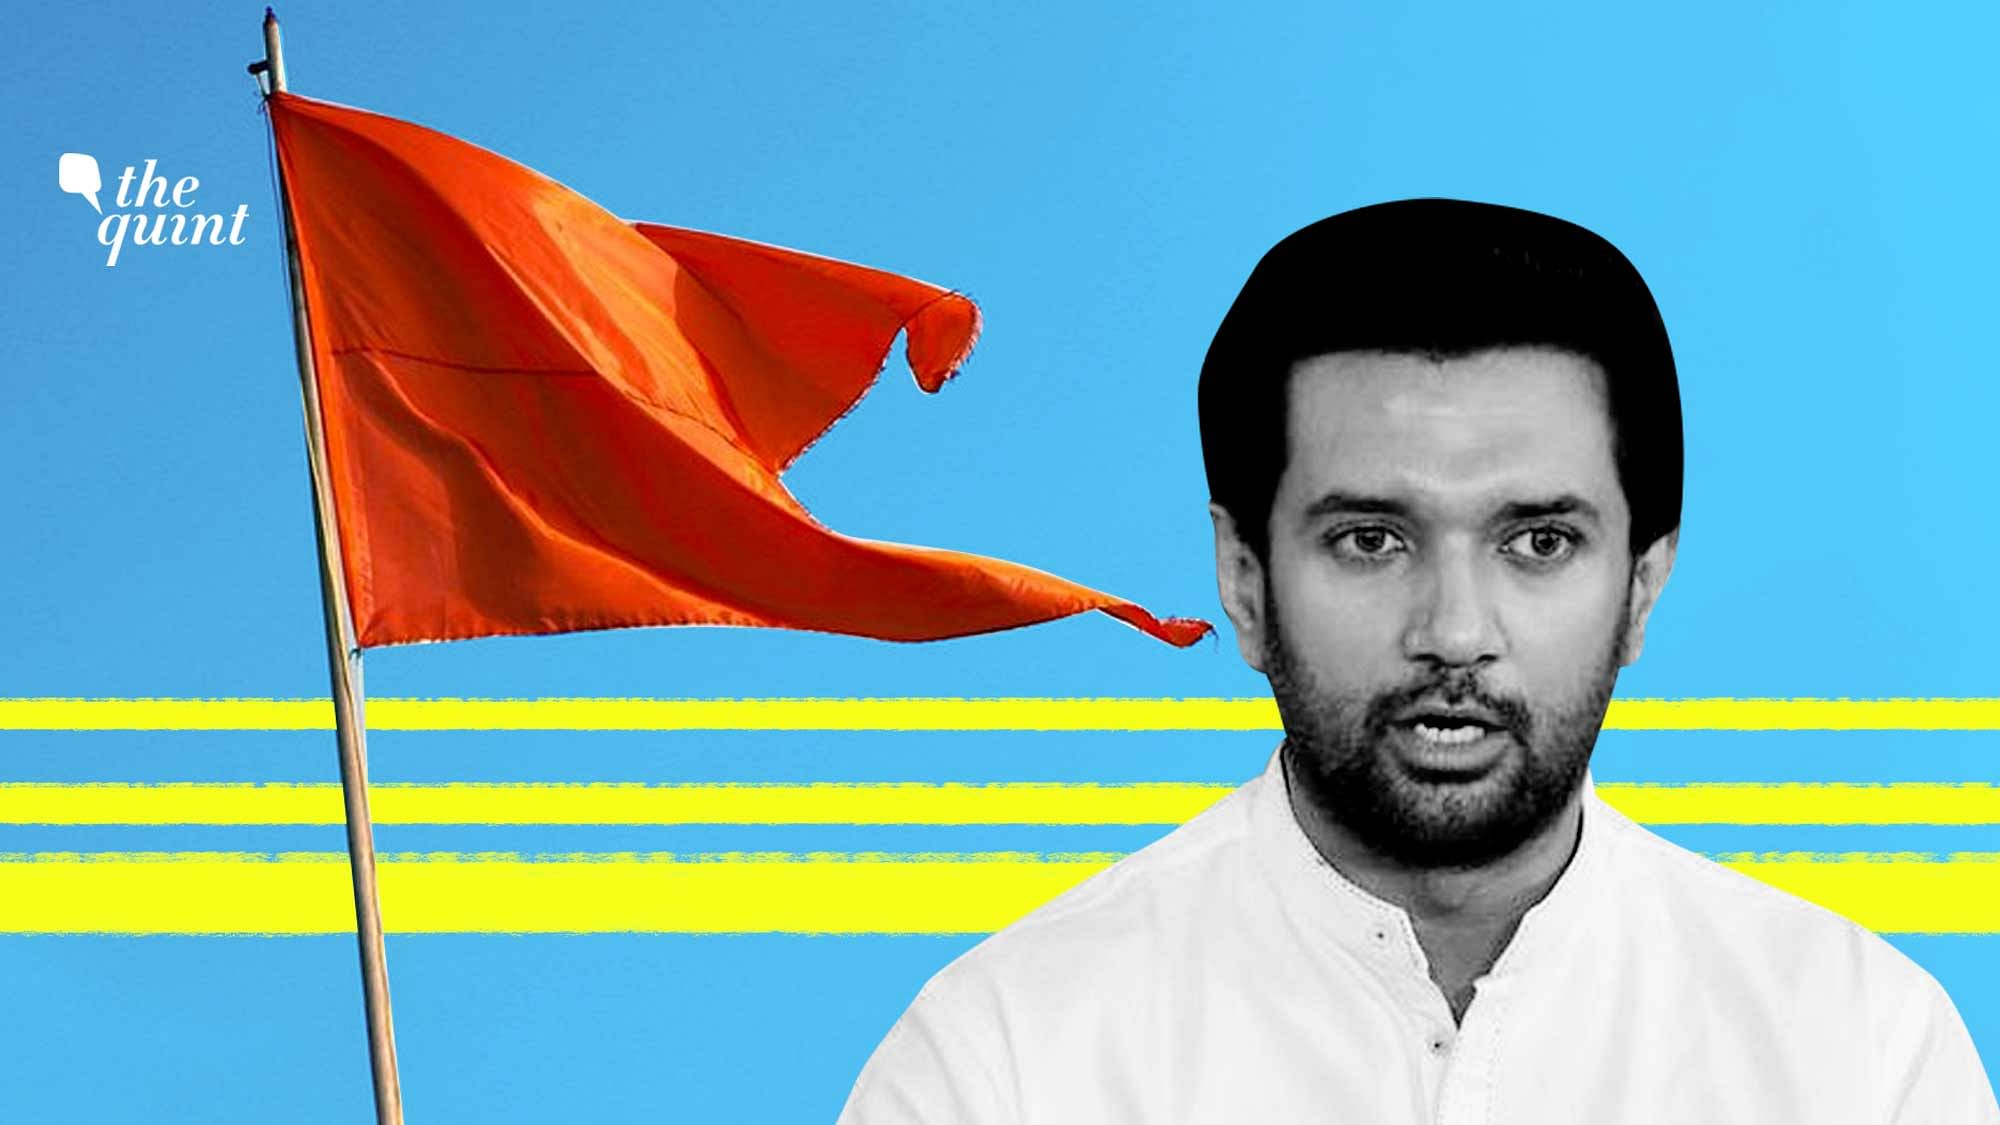 Many RSS cadies in Bihar are backing LJP chief Chirag Paswan in his battle against Bihar chief minister Nitish Kumar of the JD(U).